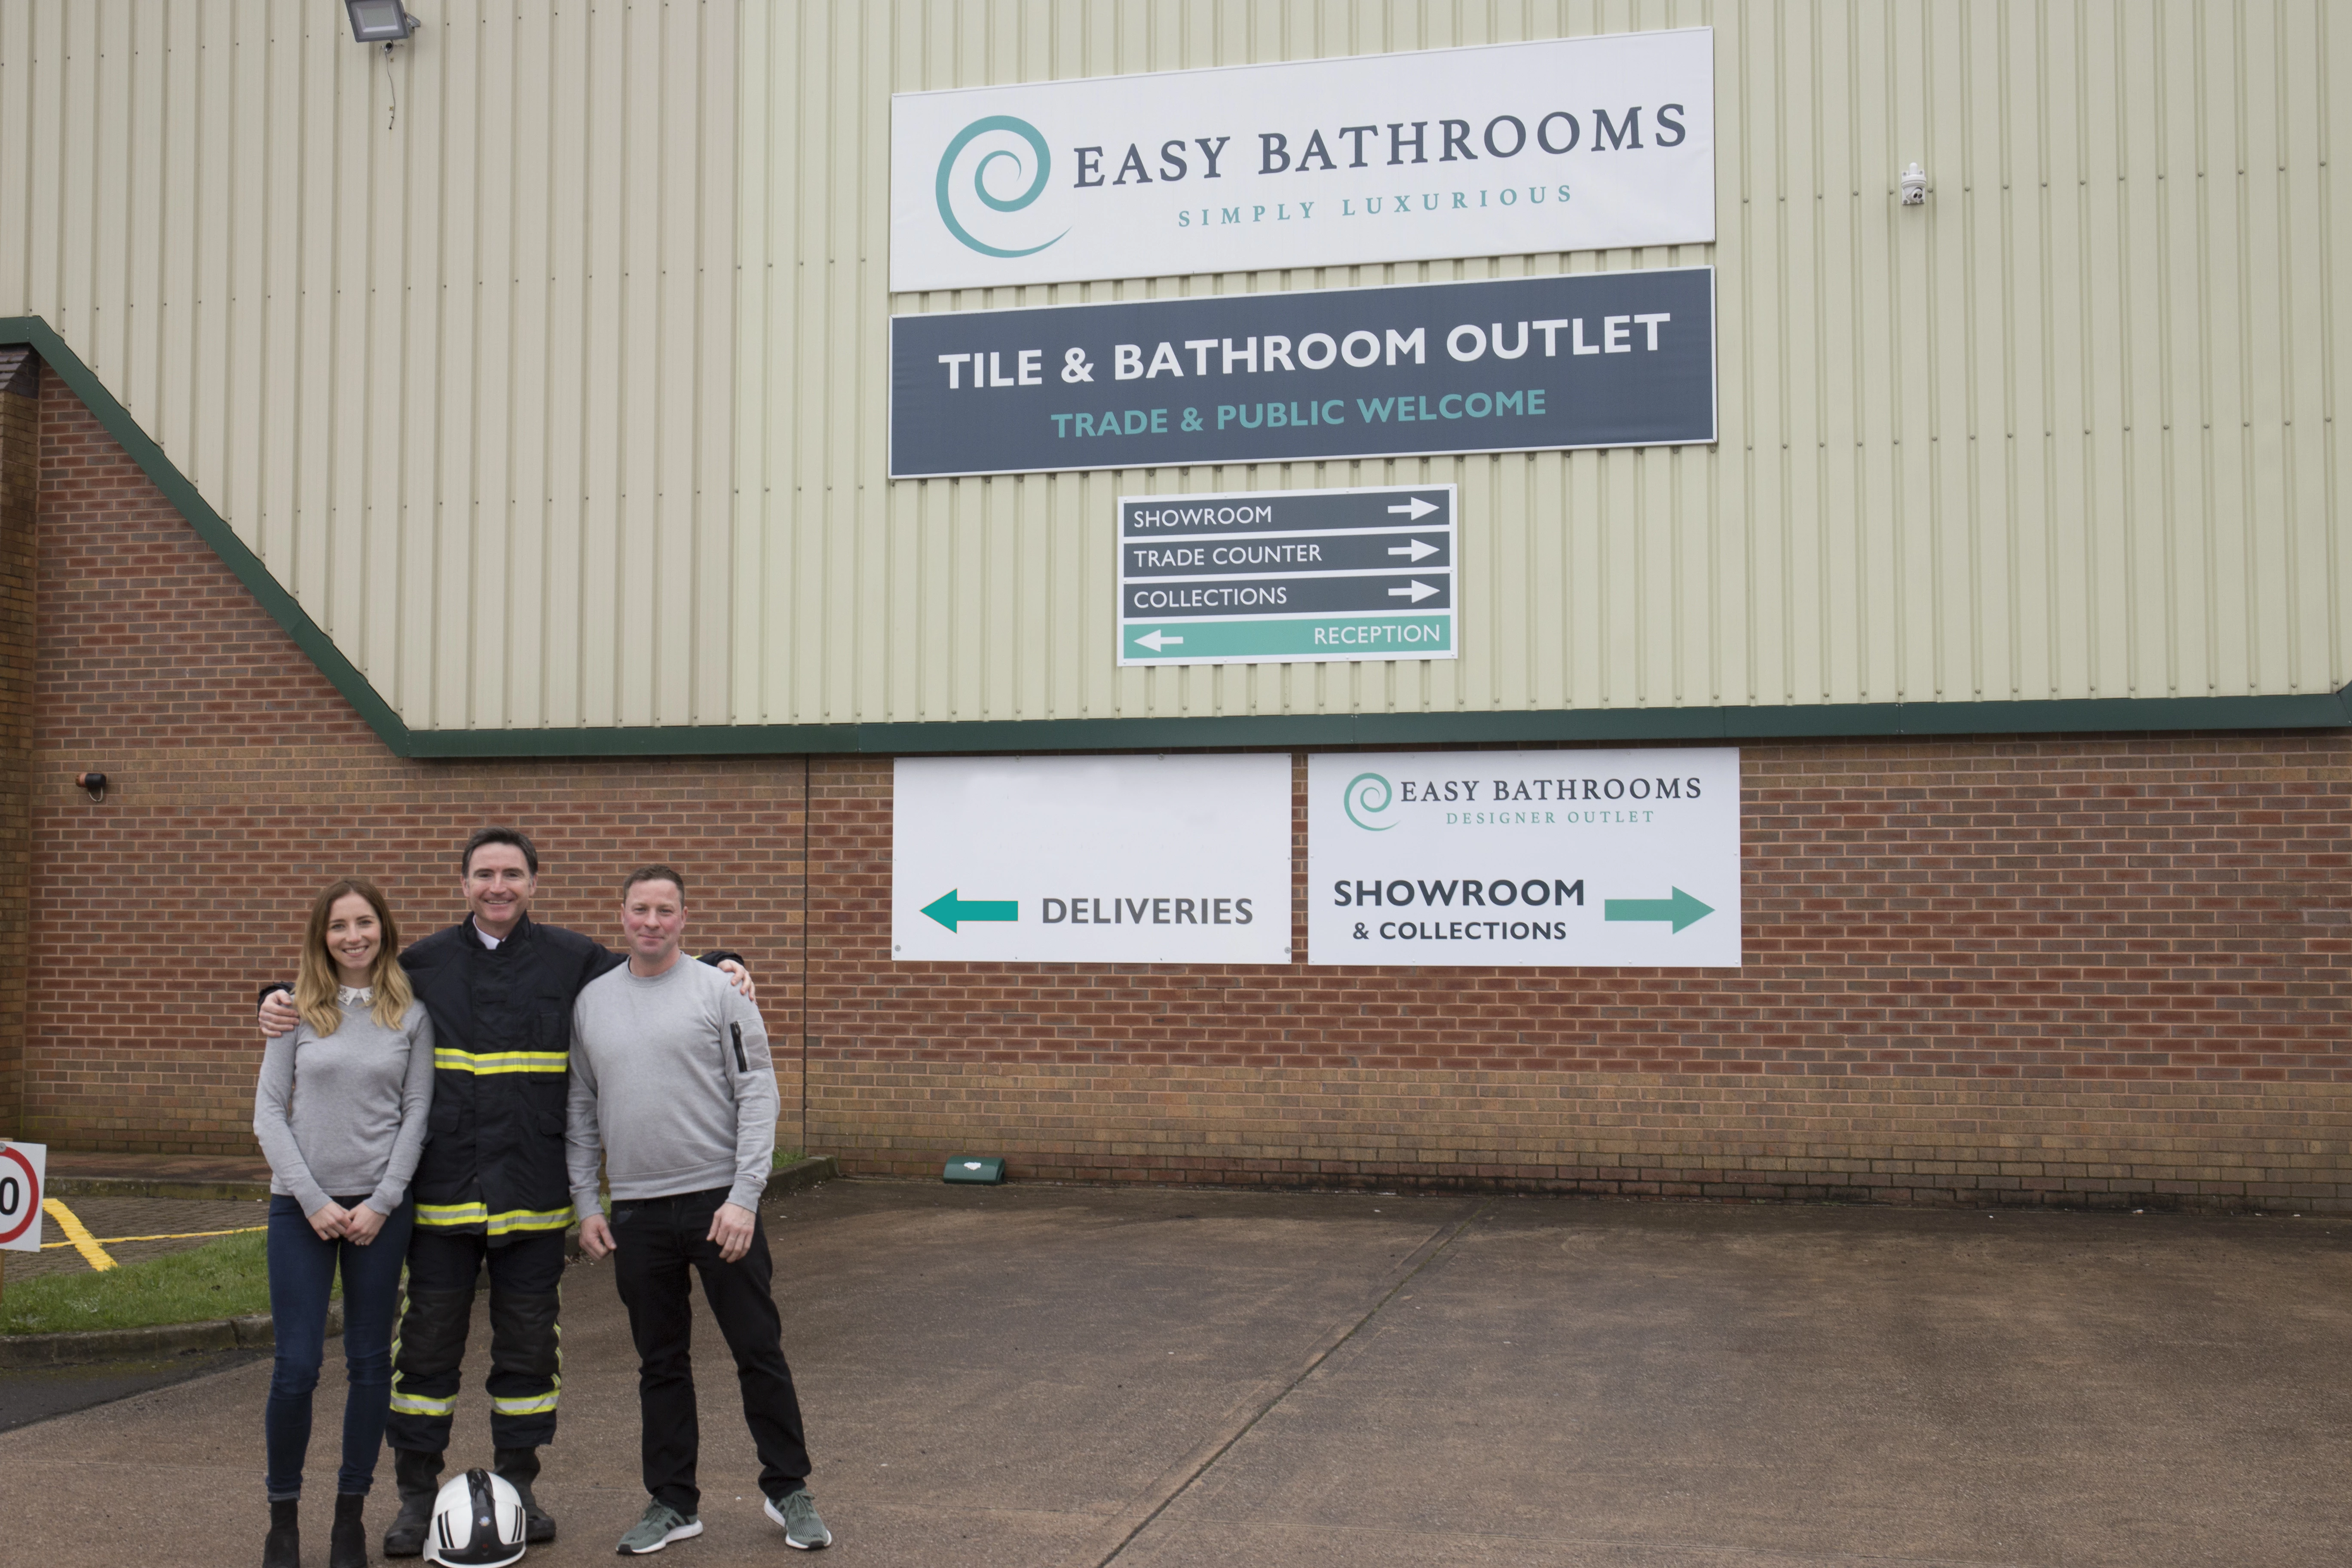 Easy Bathrooms' operations manager Lauren Fealy, with her father Stephen Fealy of West Yorkshire Fire and Rescue Service and Craig Waddington, Easy Bathrooms' founder/MD